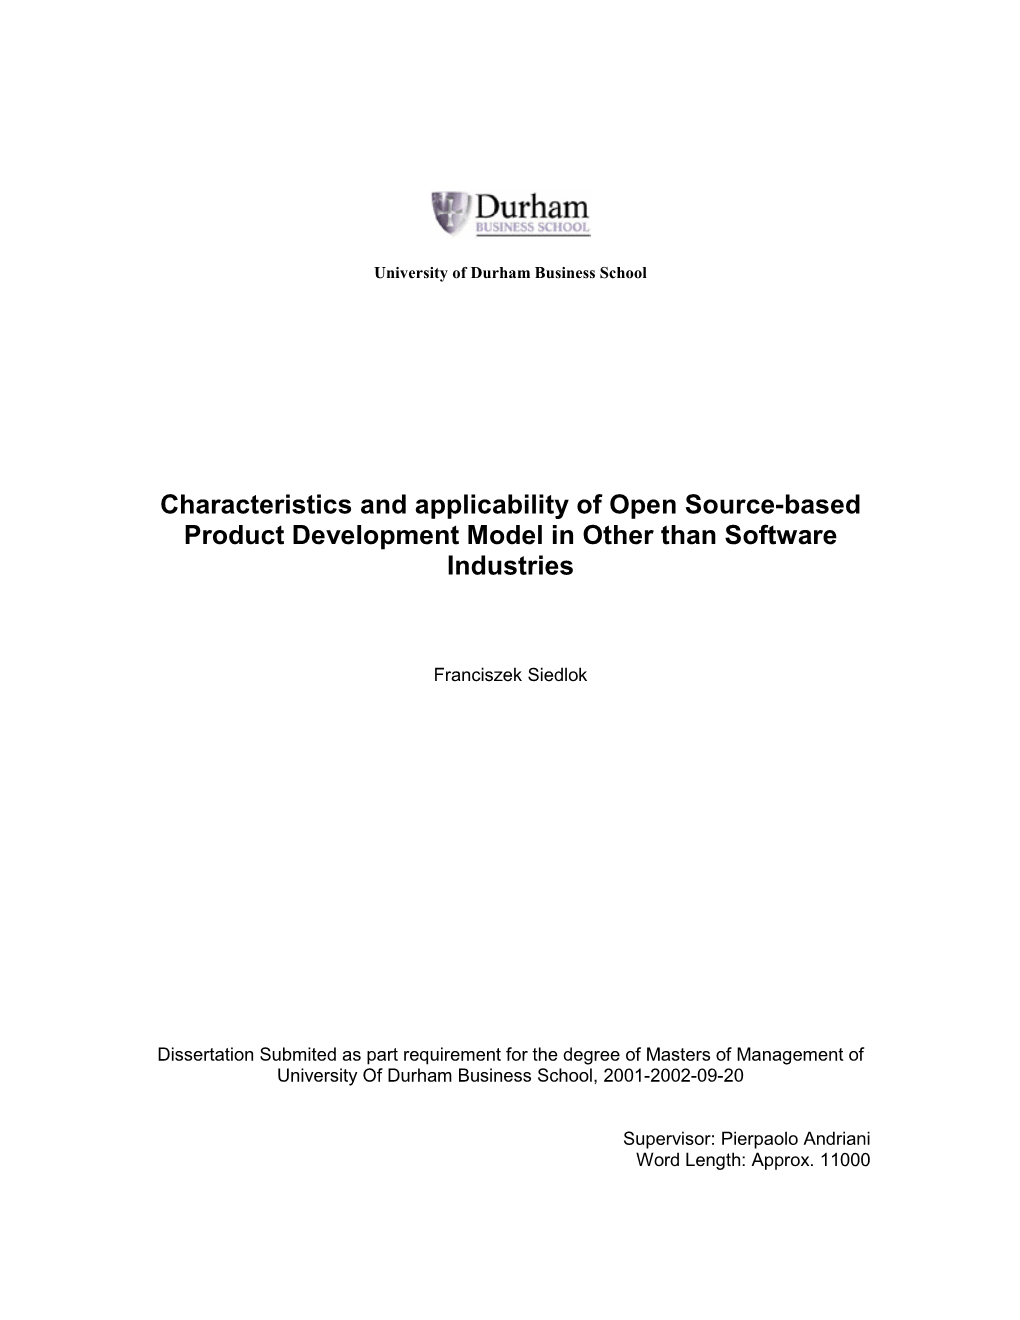 Characteristics and Applicability of Open Source-Based Product Development Model in Other Than Software Industries